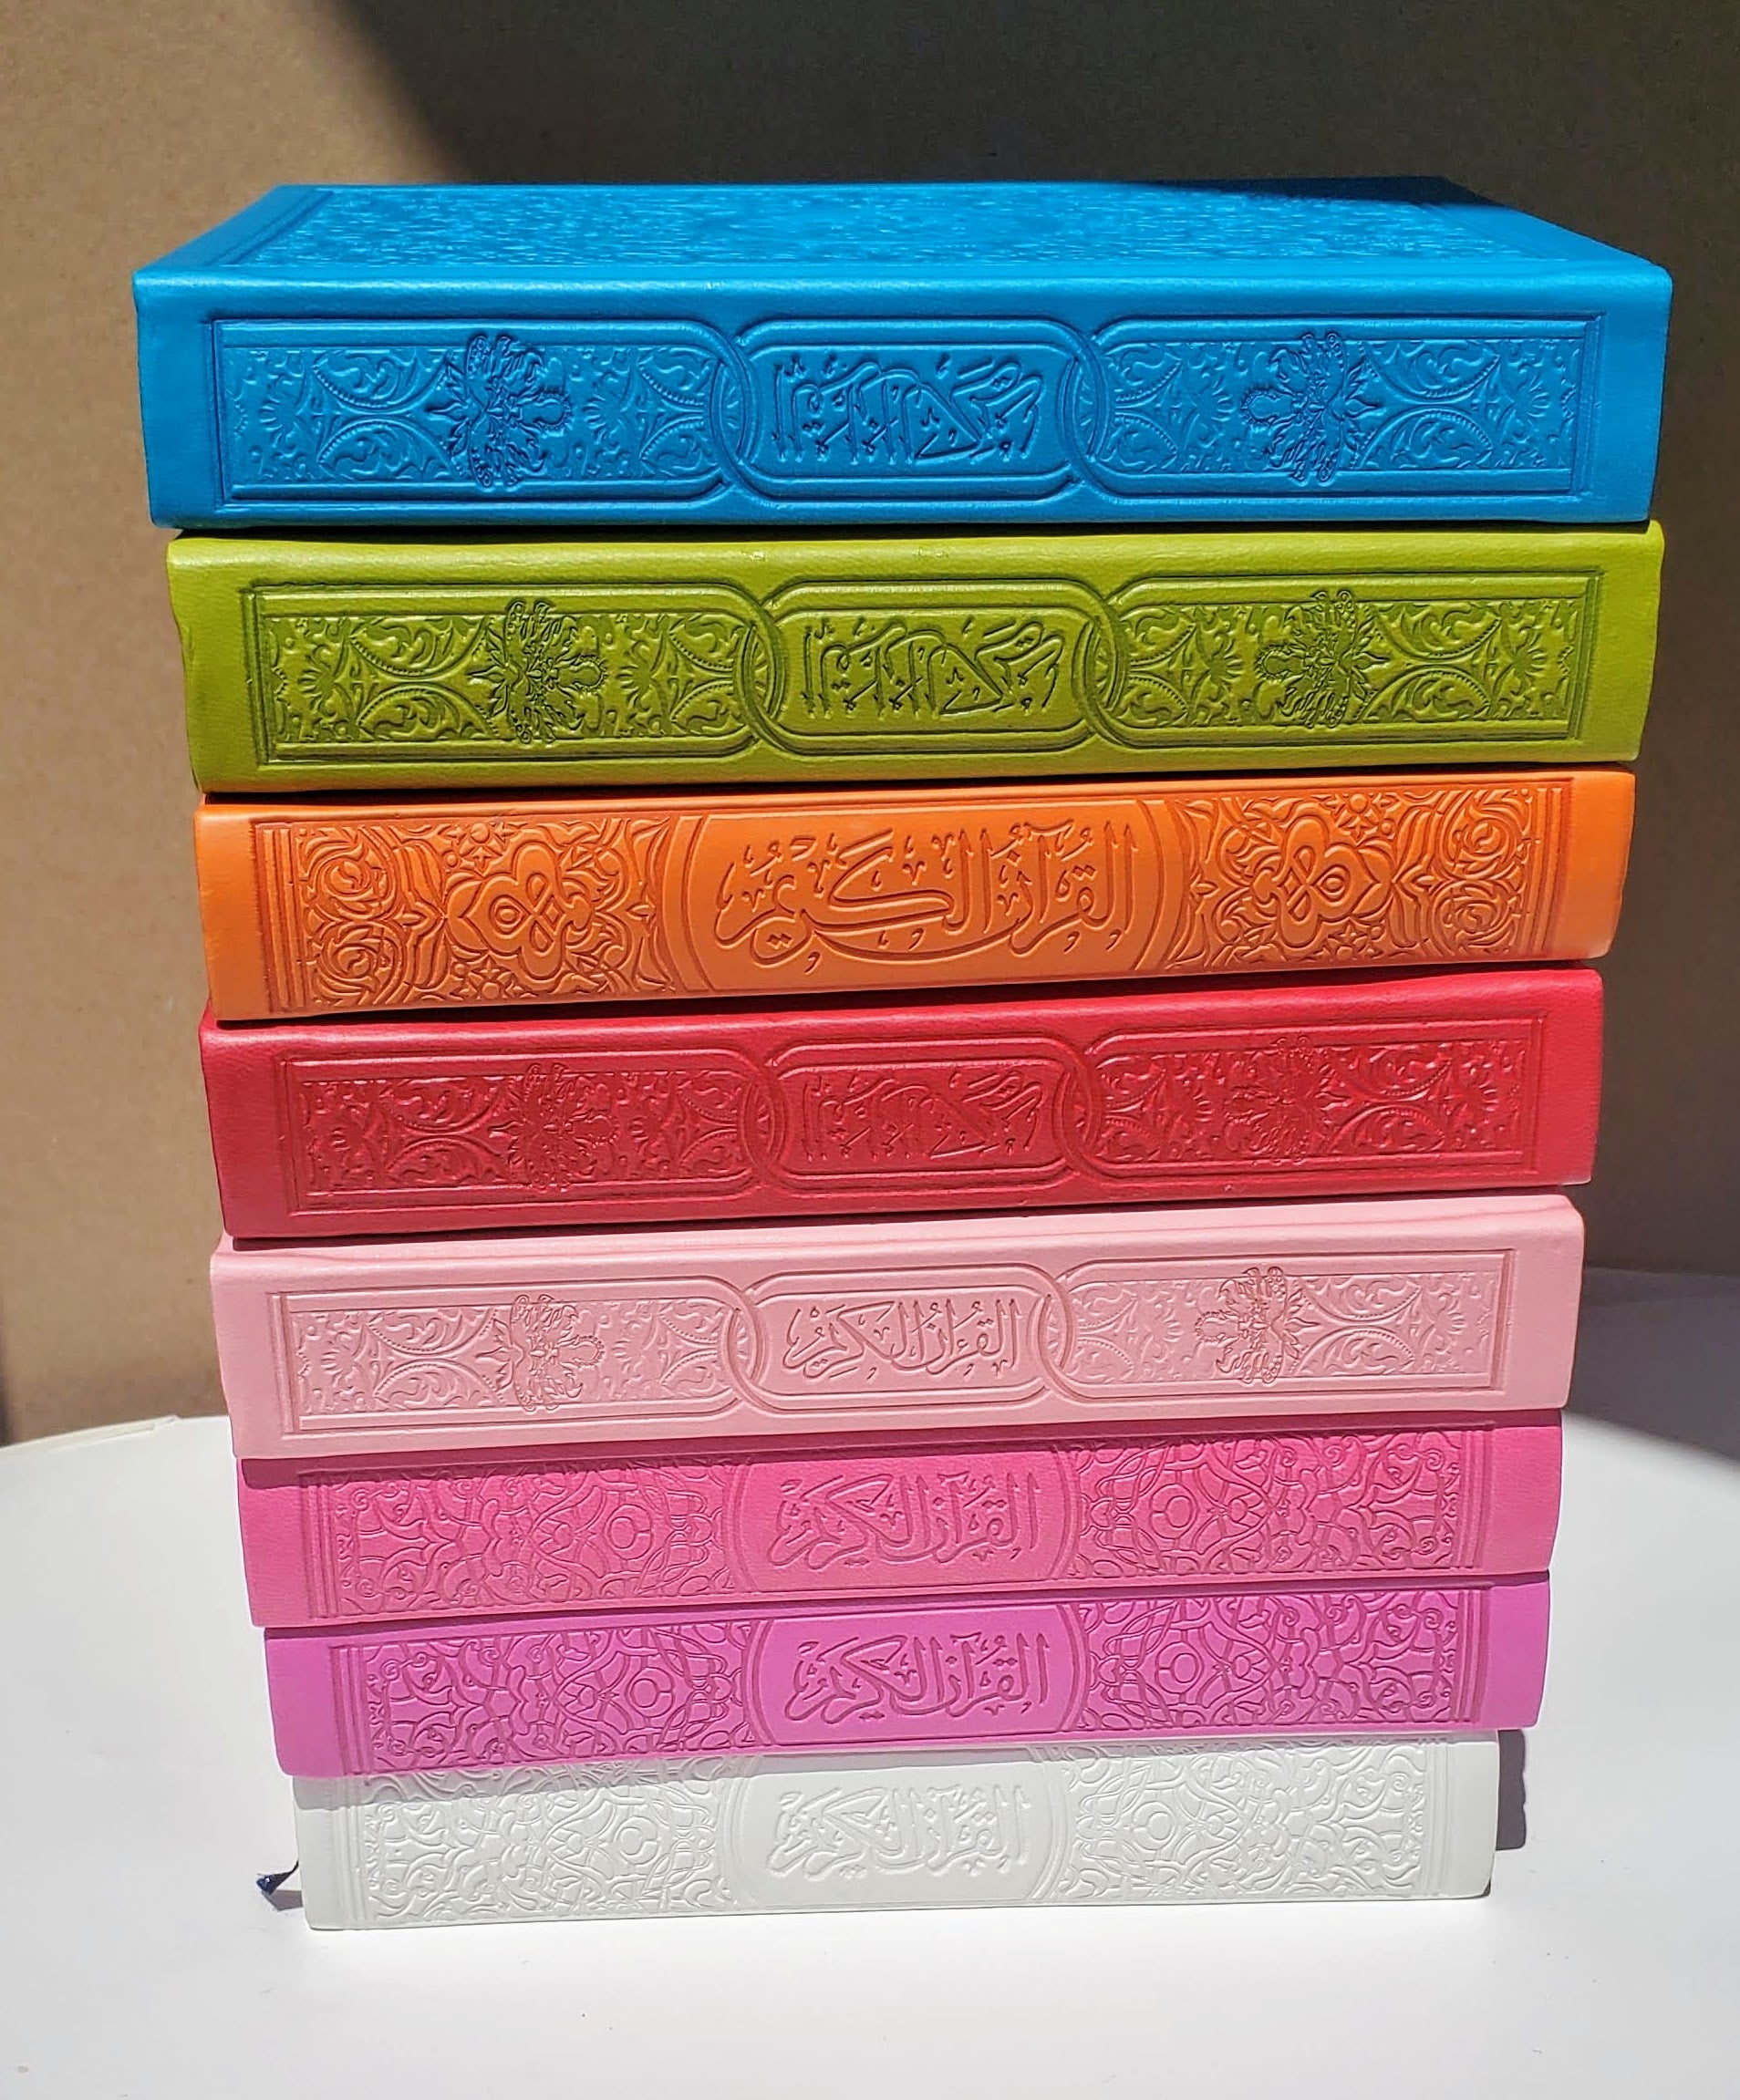 Rainbow Quran  Leather Embossed Color pop Holy Koran – With A Spin